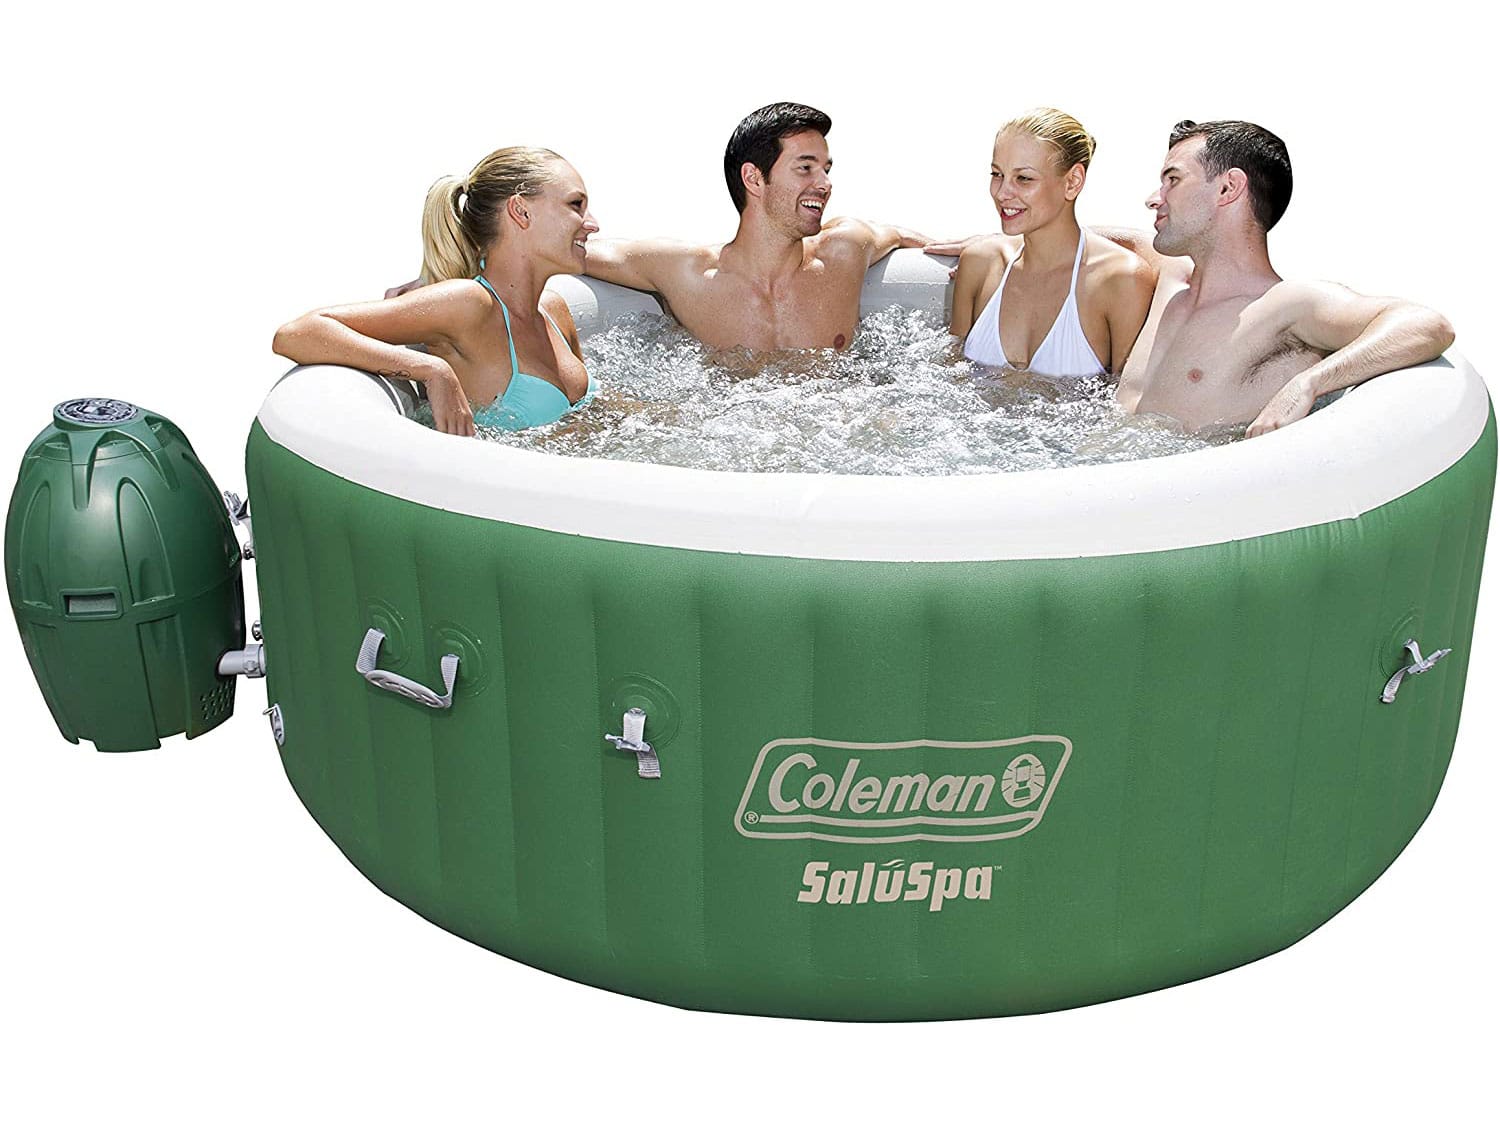 Coleman 90363E SaluSpa Inflatable Hot Tub Spa, Pack of 1, Green & White